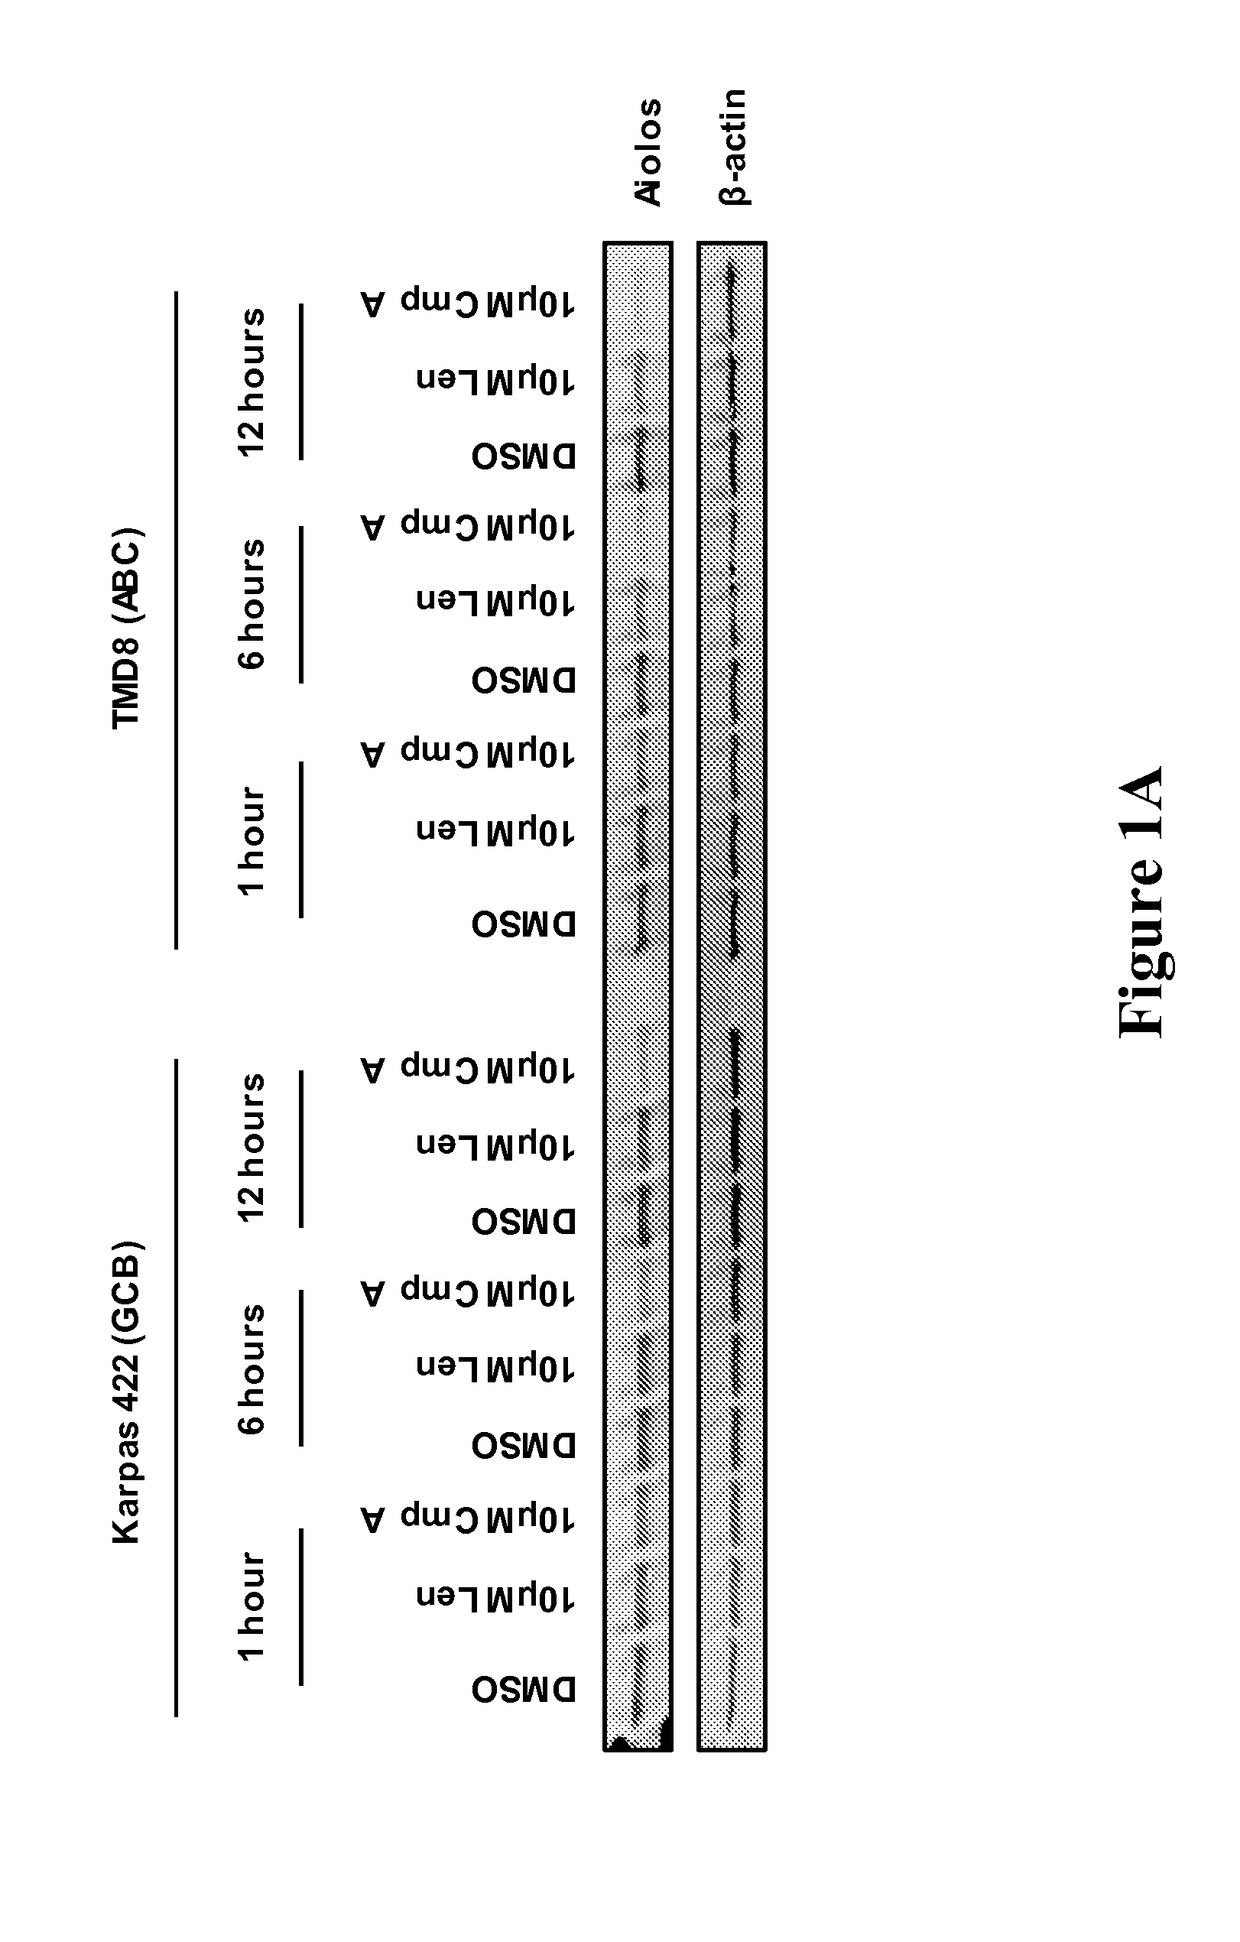 Methods for determining drug efficacy for the treatment of diffuse large b-cell lymphoma, multiple myeloma, and myeloid cancers